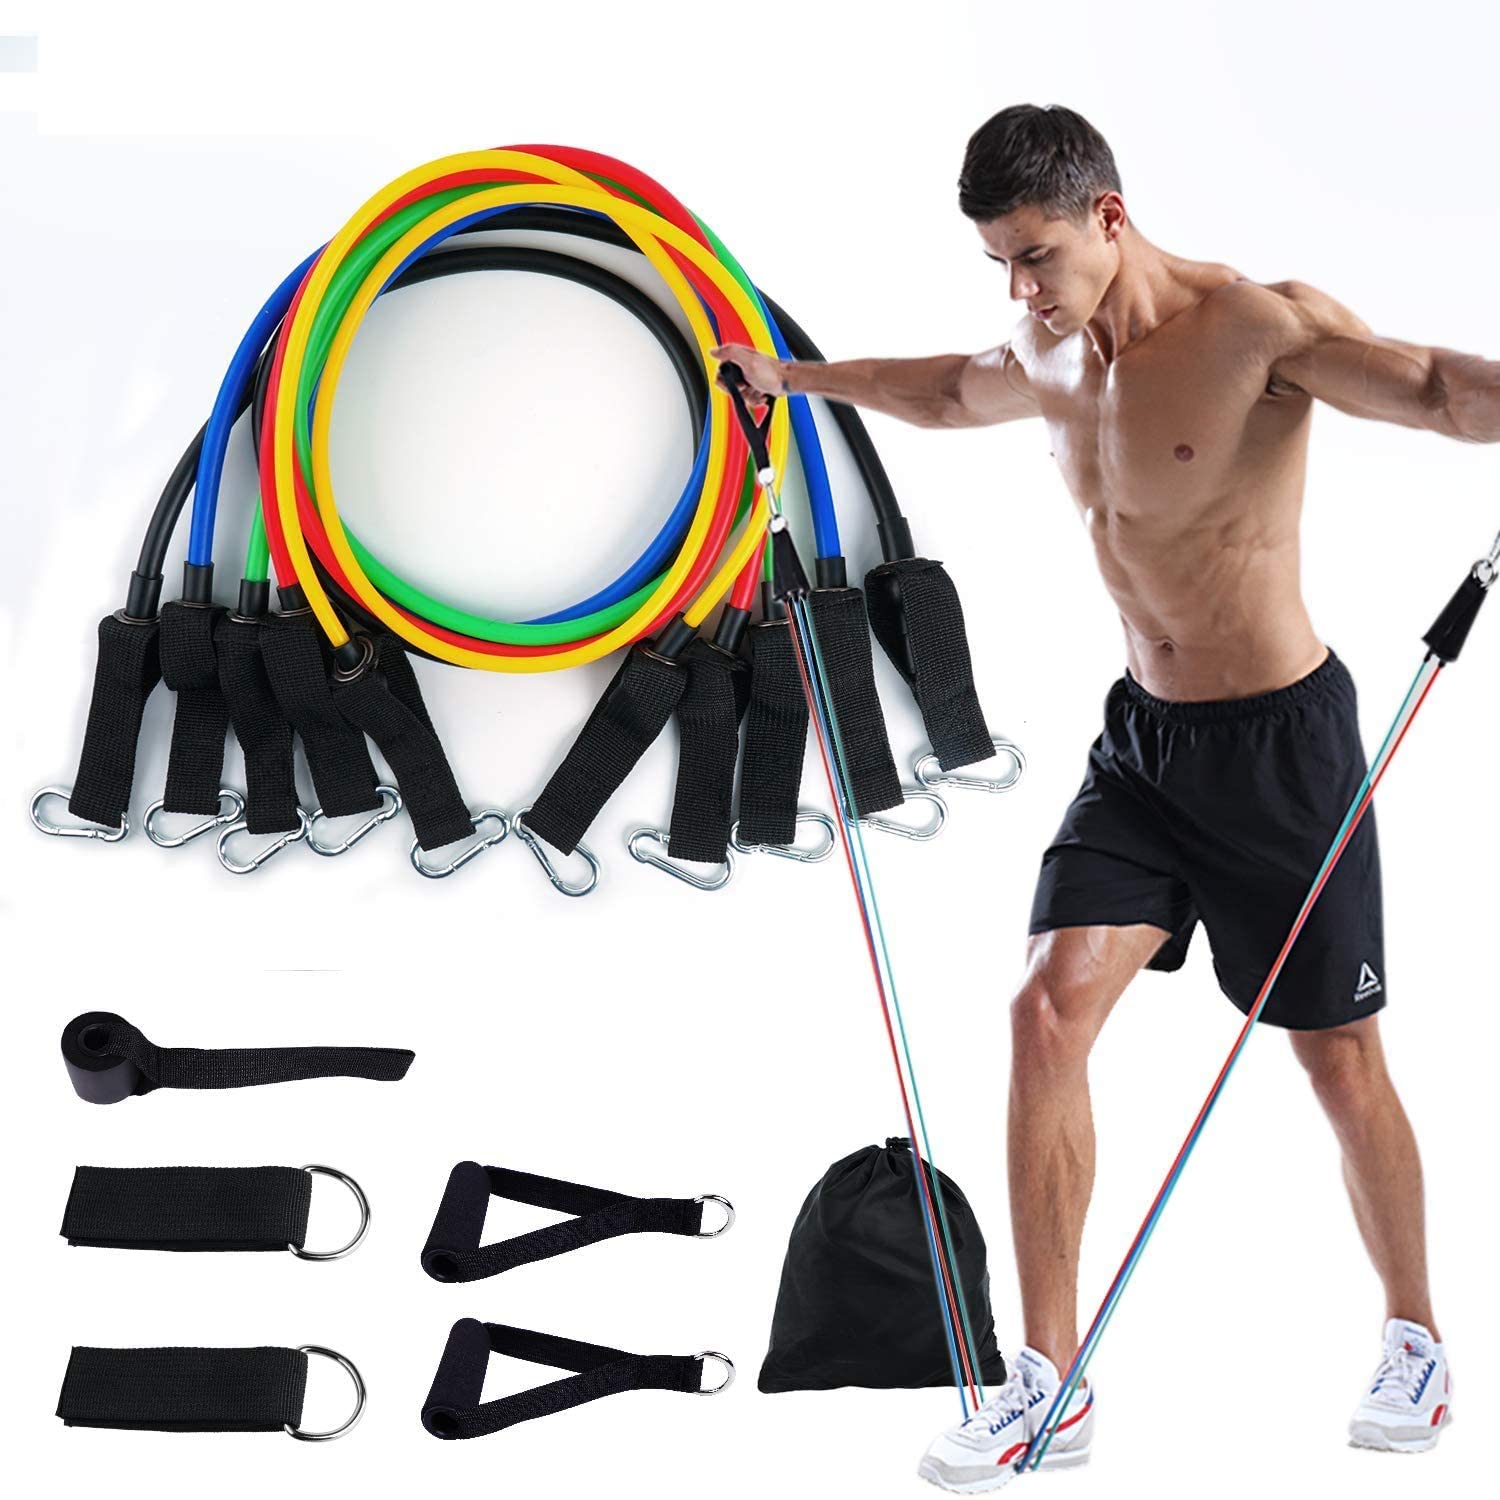 12 Pack Resistance Bands Set Muscle Building Workout Program Set Handles Exercise Bands with Door Anchor Heavy Duty full-body resistance Workout Exercise Bands with Door Anchor /& Waterproof Carry Bag